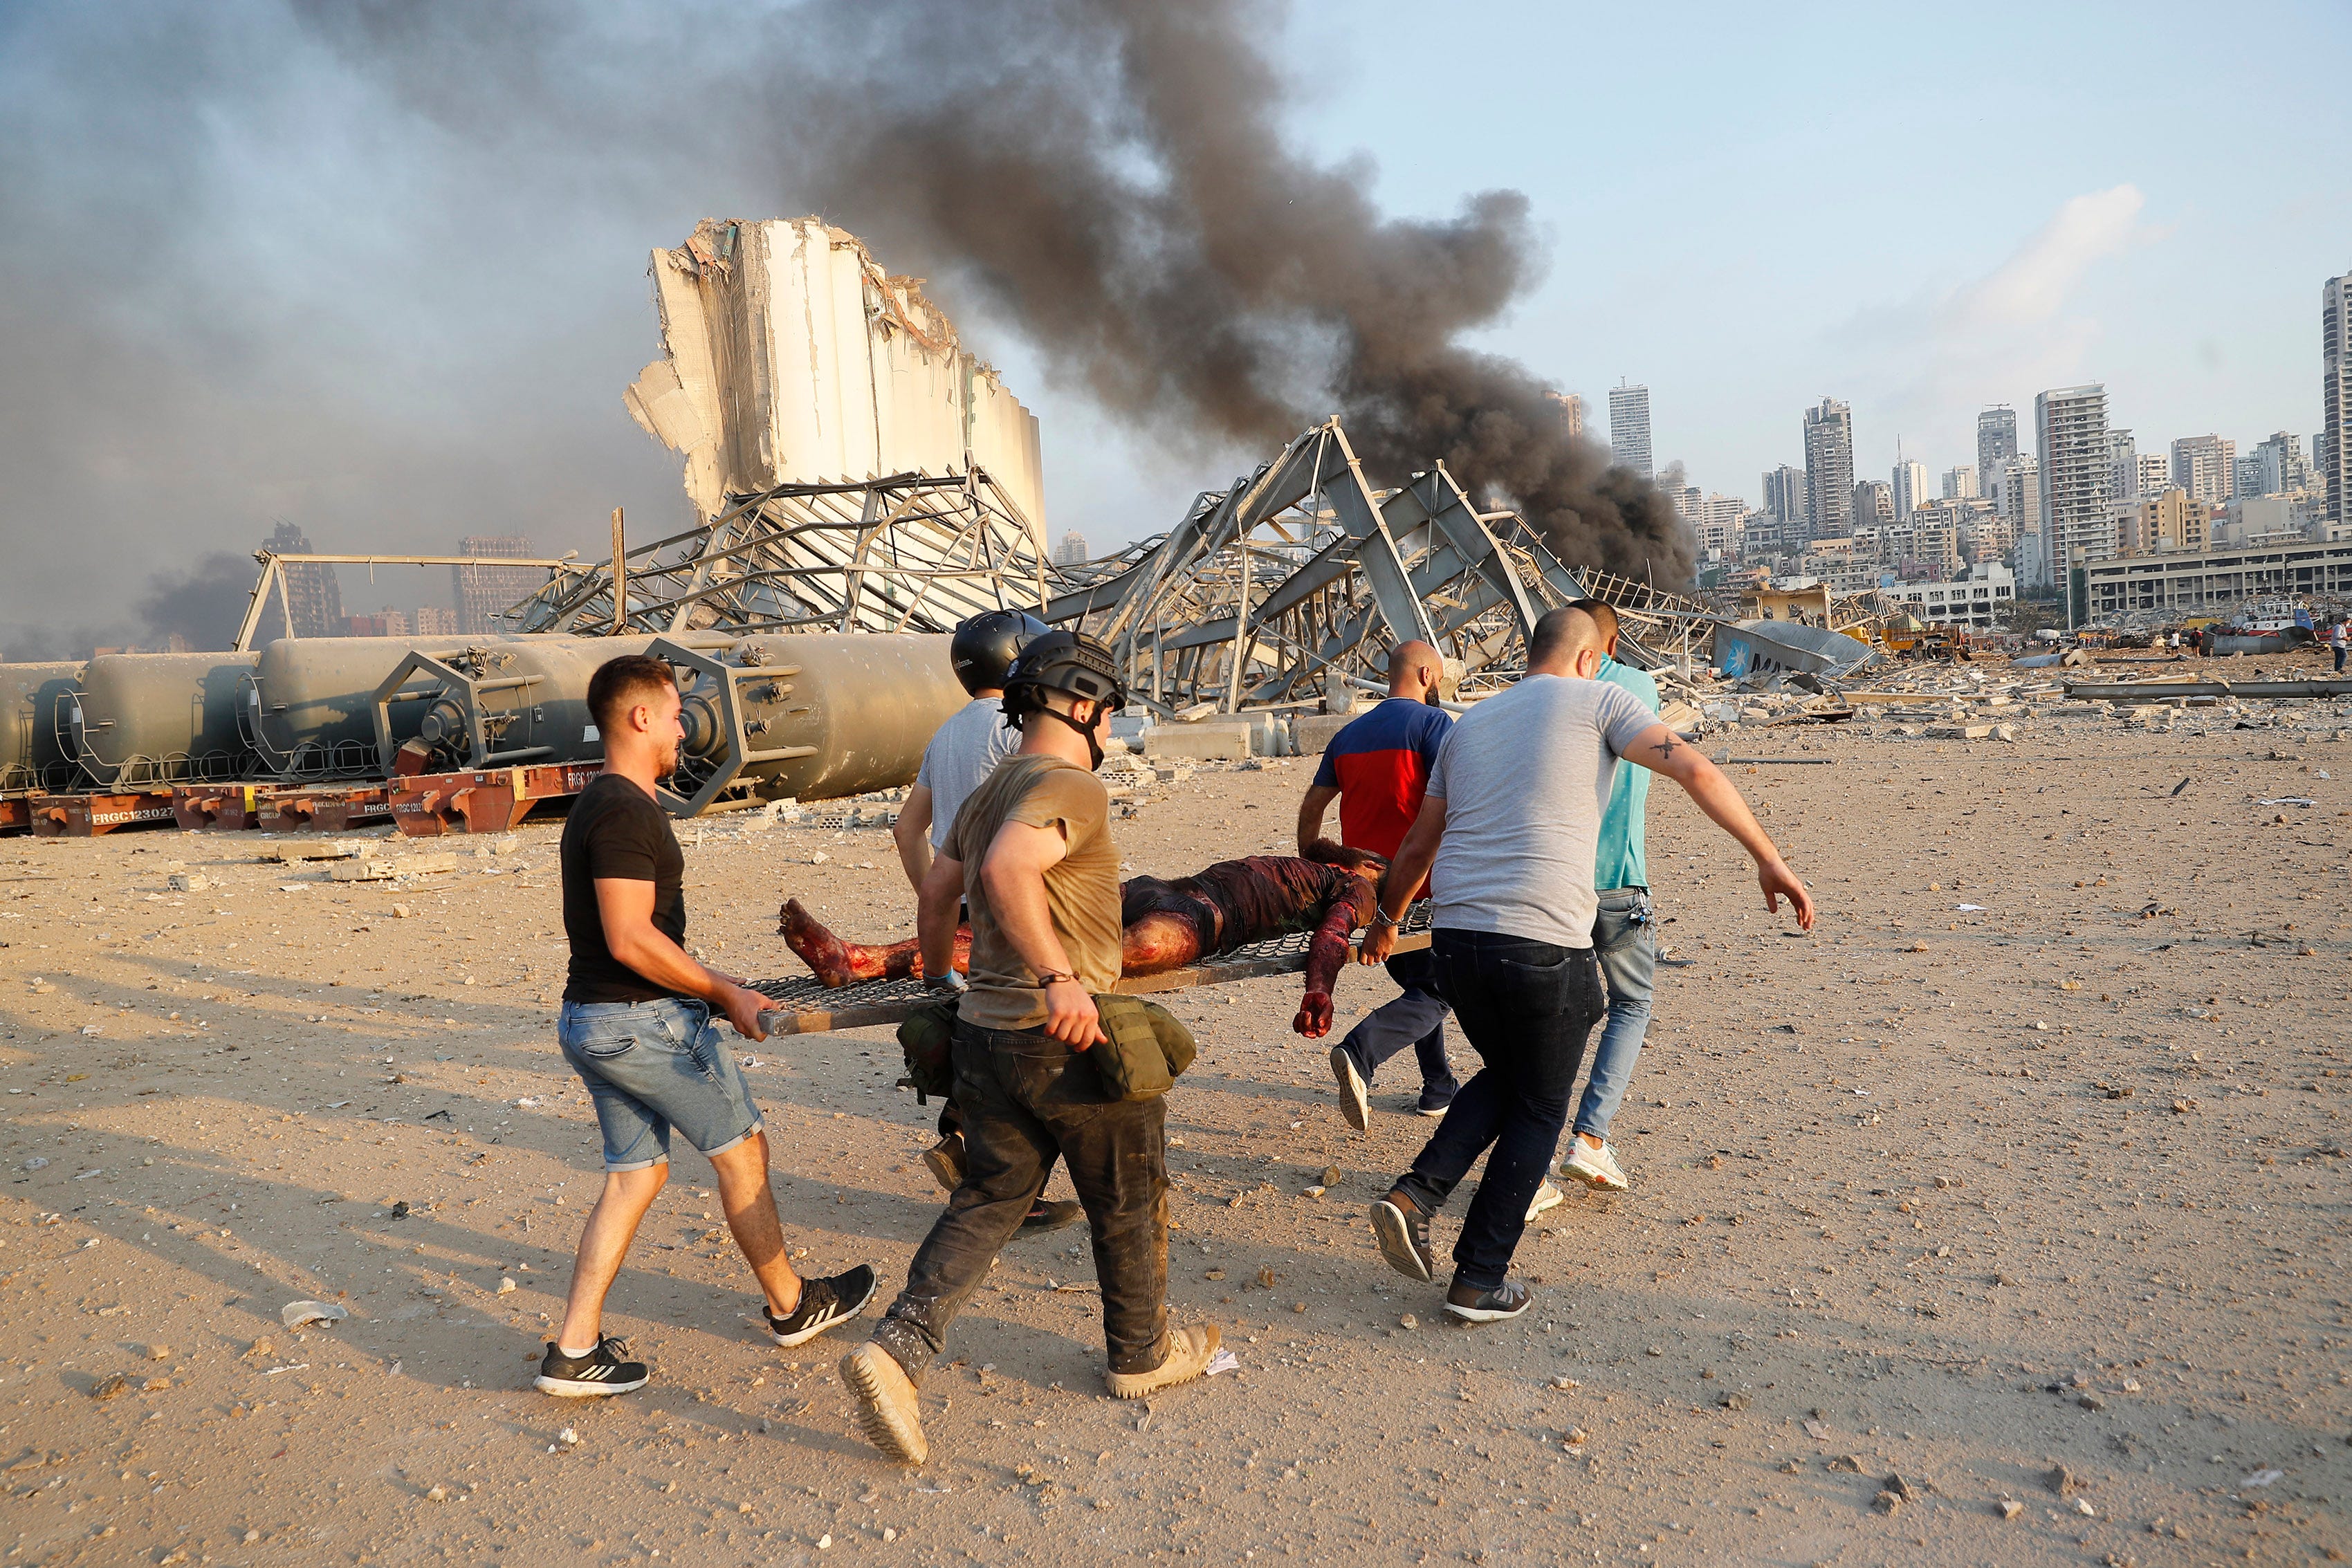 Civilians carry a victim at the explosion scene that hit the seaport, in Beirut Lebanon.